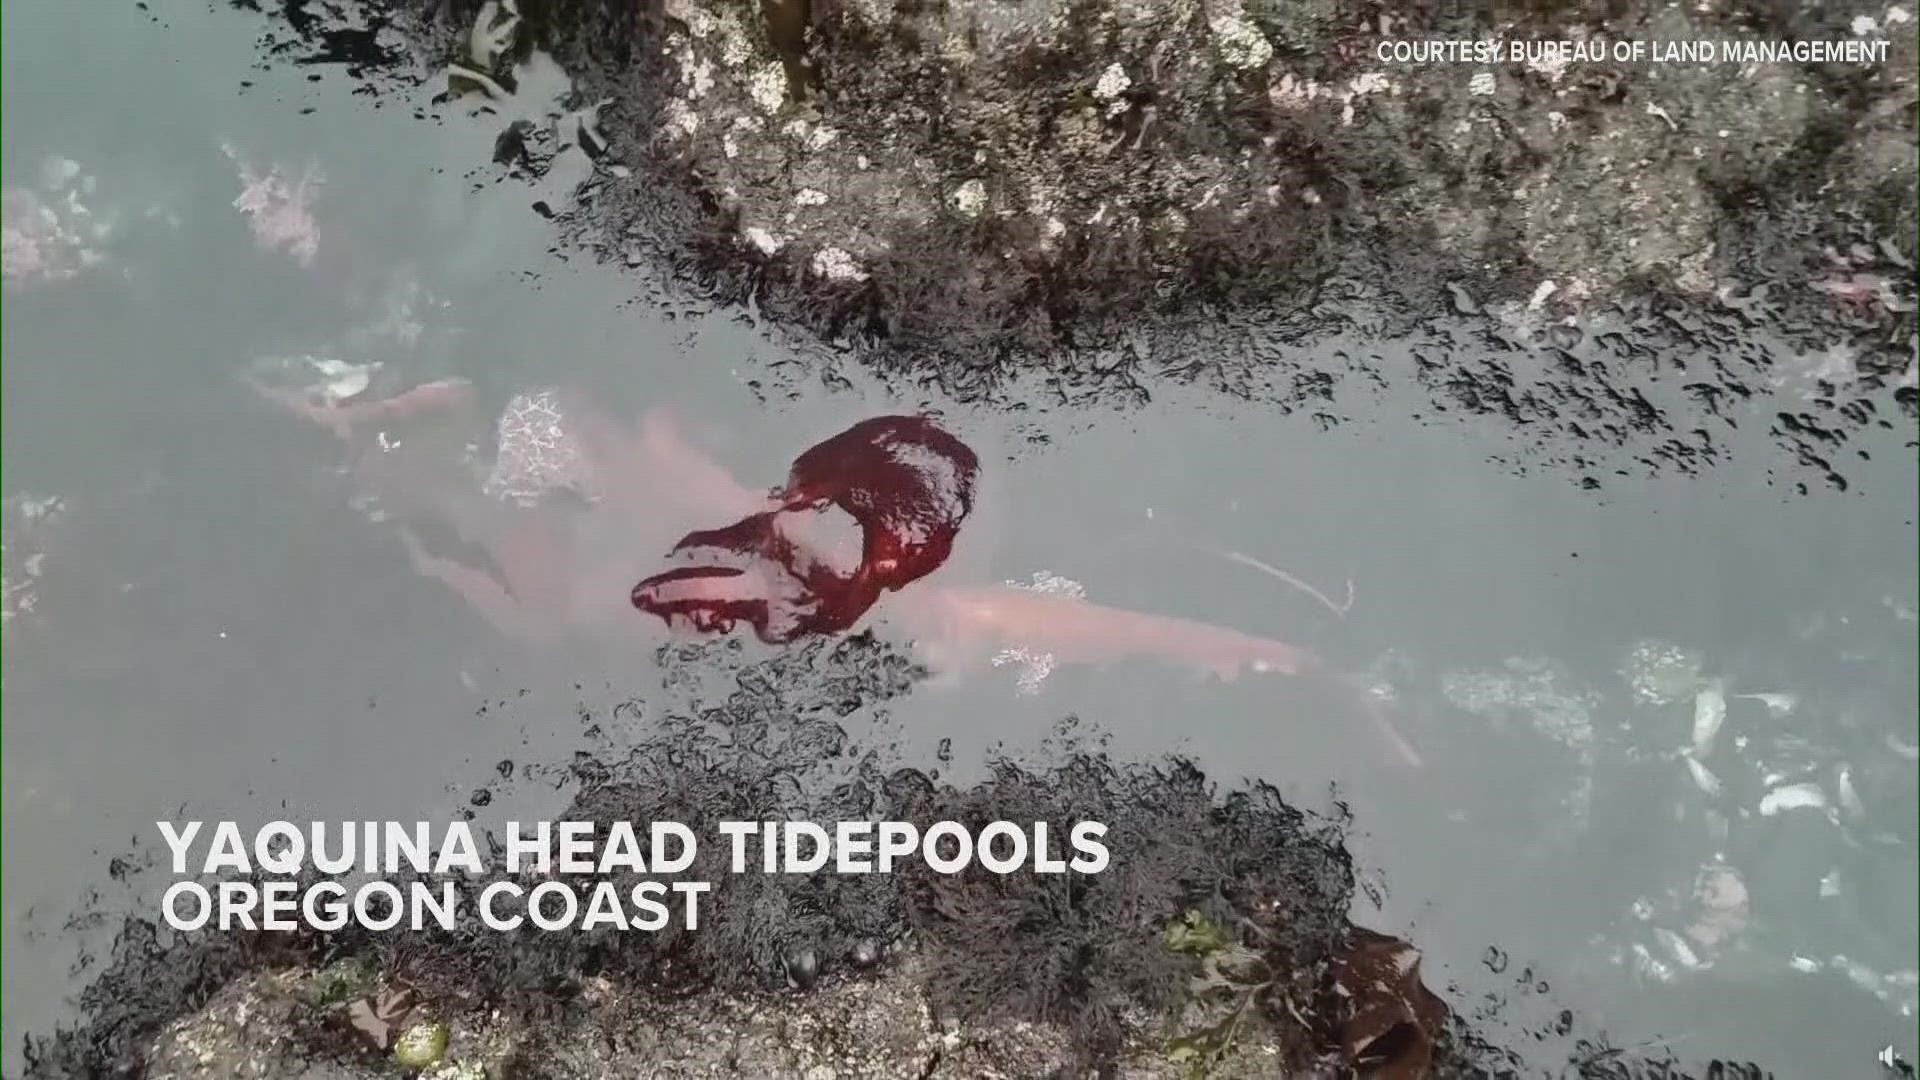 A Giant Pacific octopus is making its way through the Yaquina Head tidepools on the Oregon coast. Experts say it's spotted in this area only a few times a year.